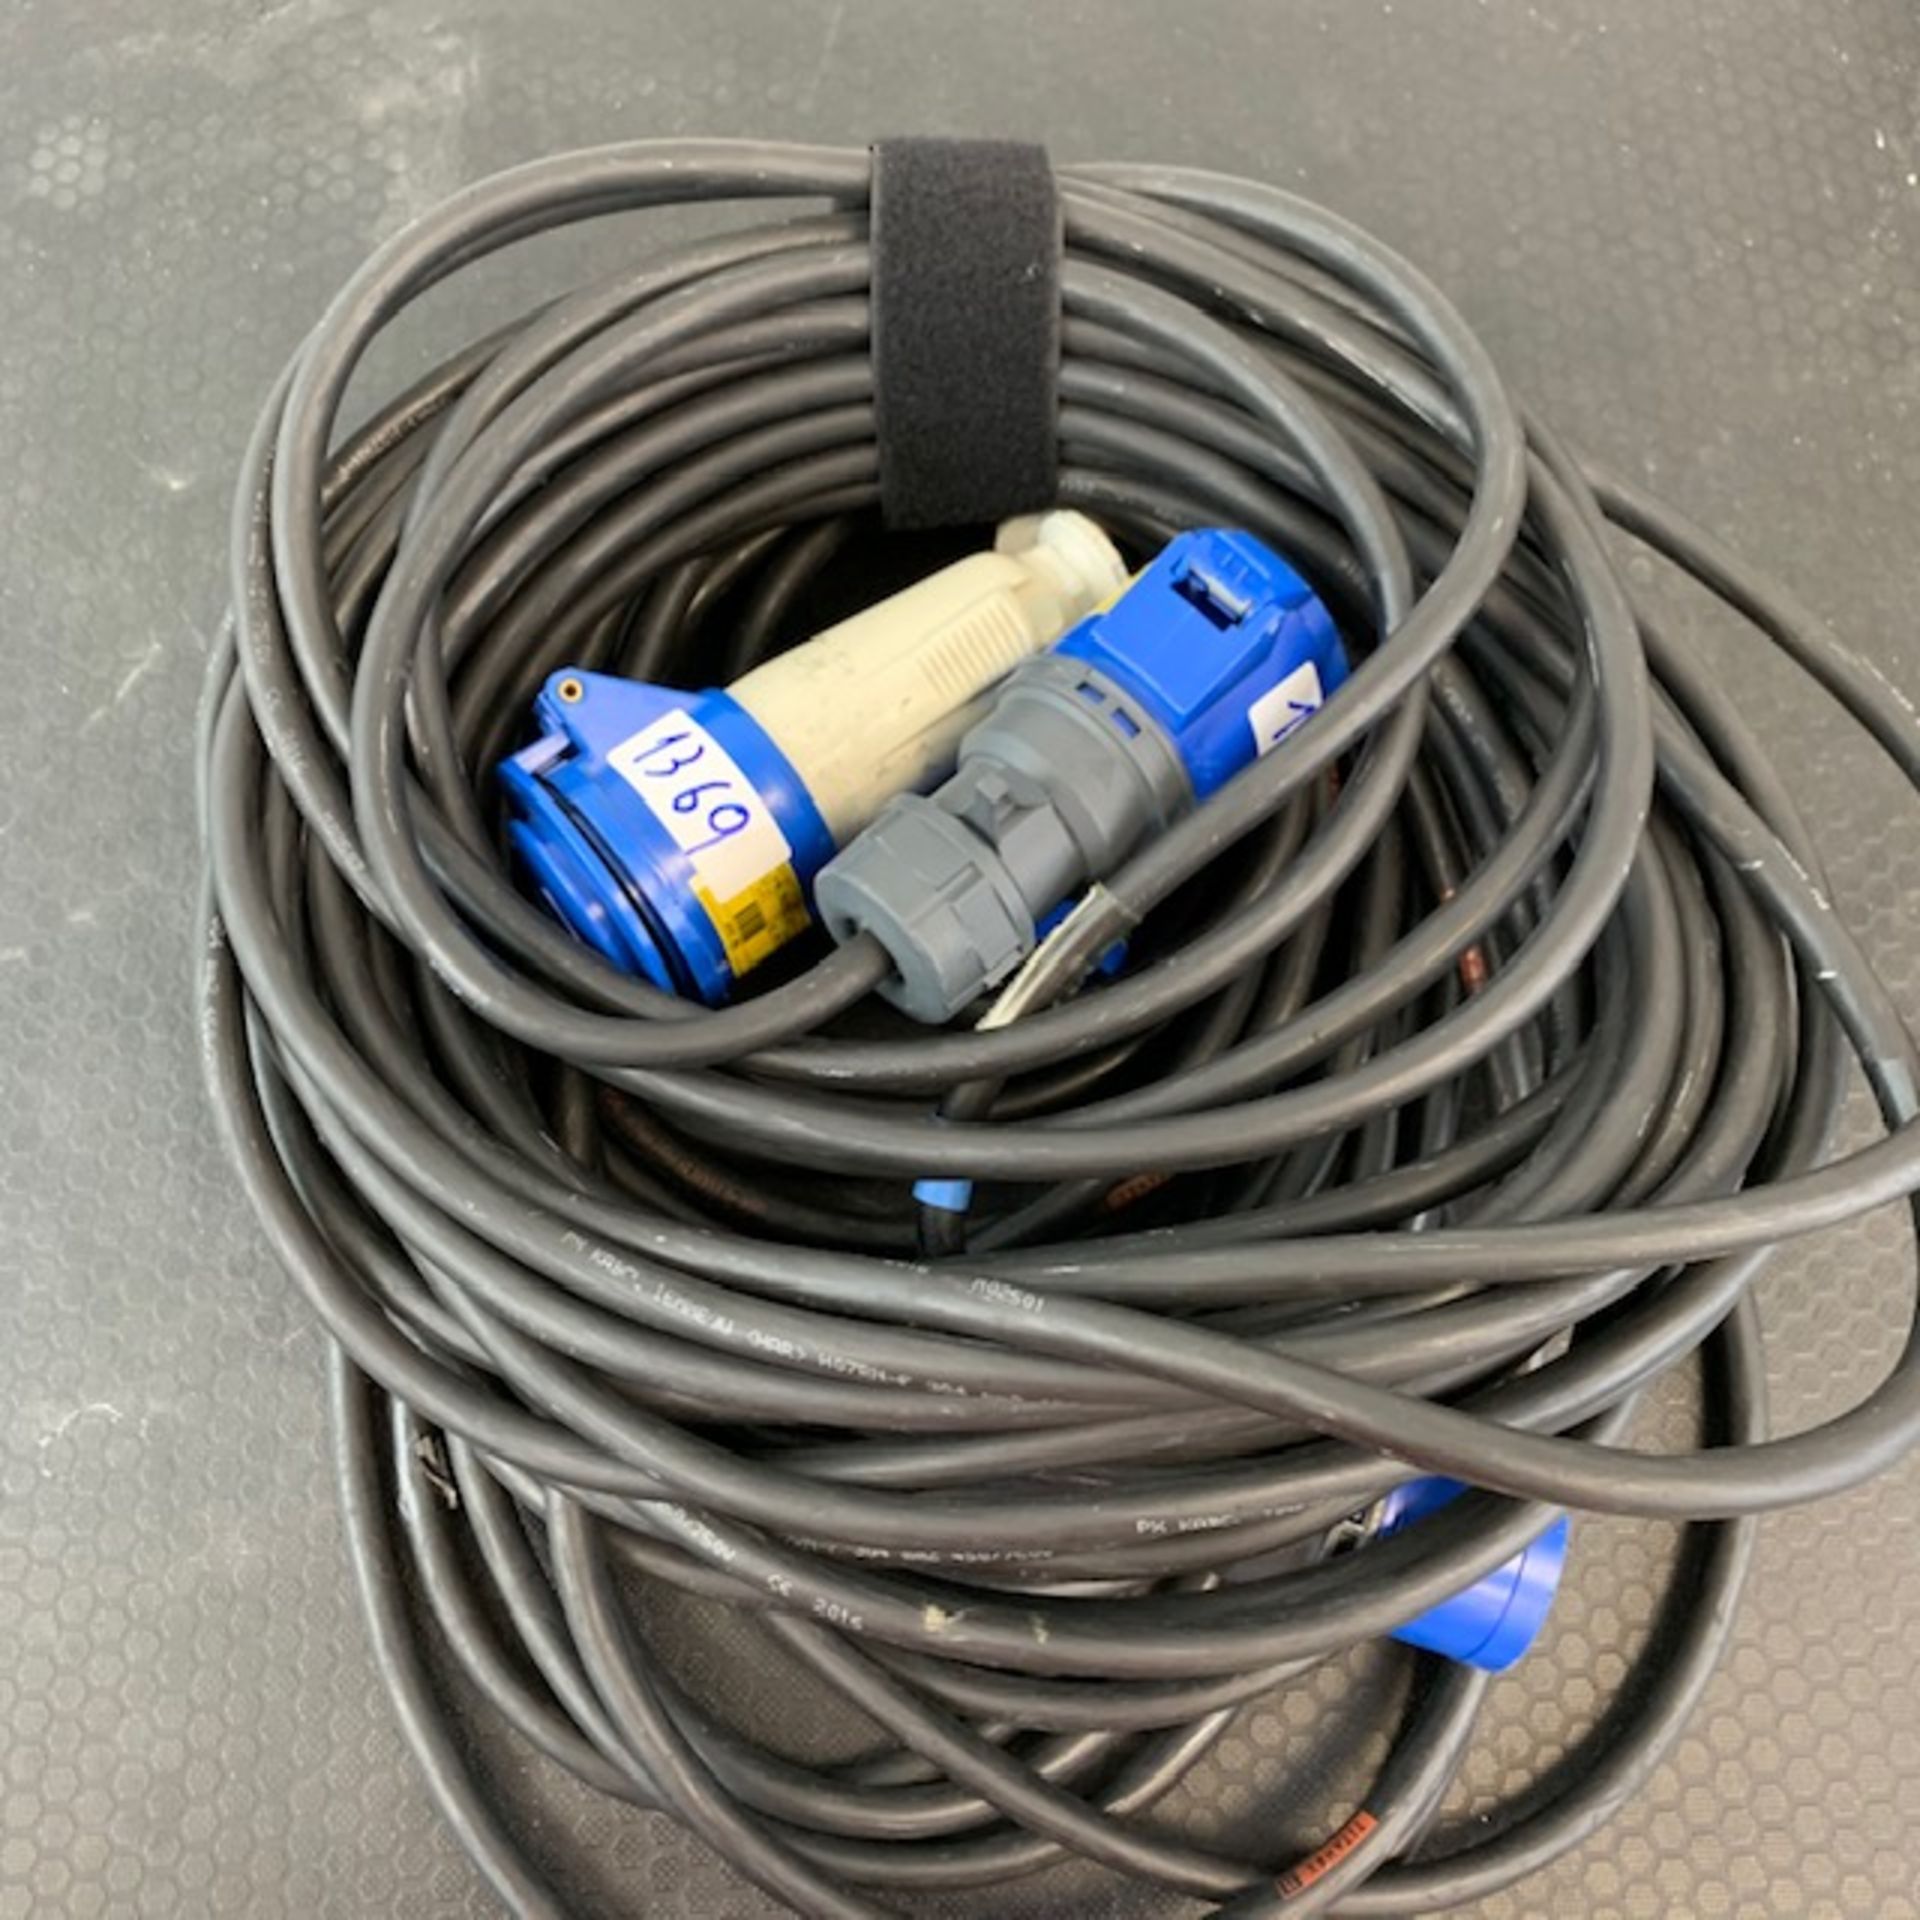 2 X 32Amp Single Phase 20M Cable - Ref: 1369 - CL581 - Location: Altrincham WA14Items will be